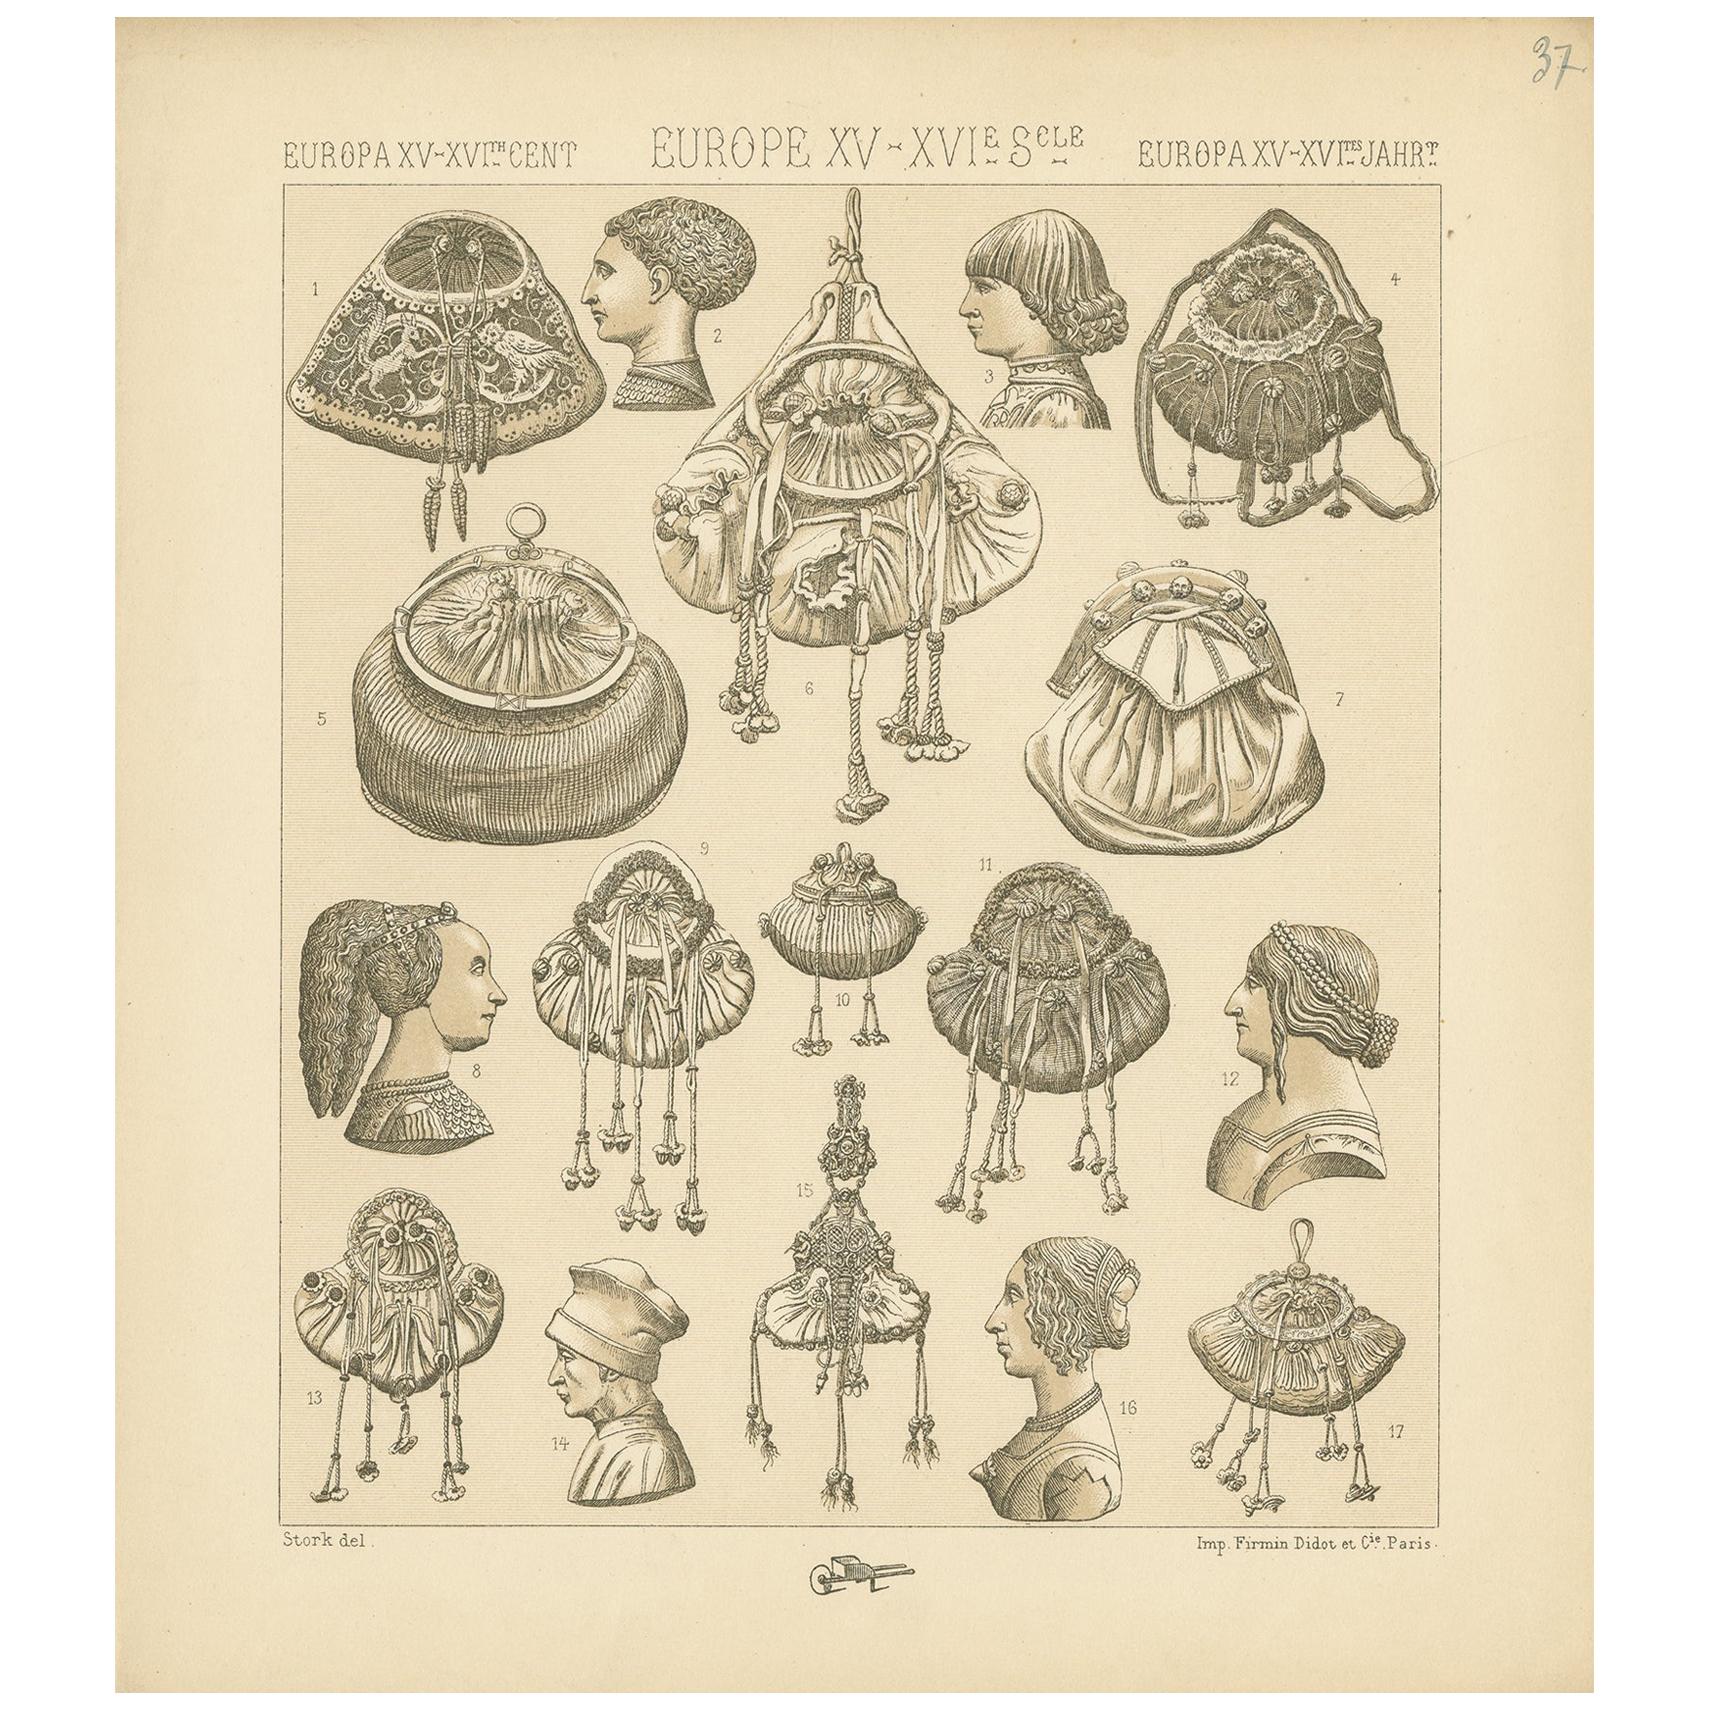 Pl 37 Antique Print of European 15th-16th Century Decorative Objects by Racinet For Sale